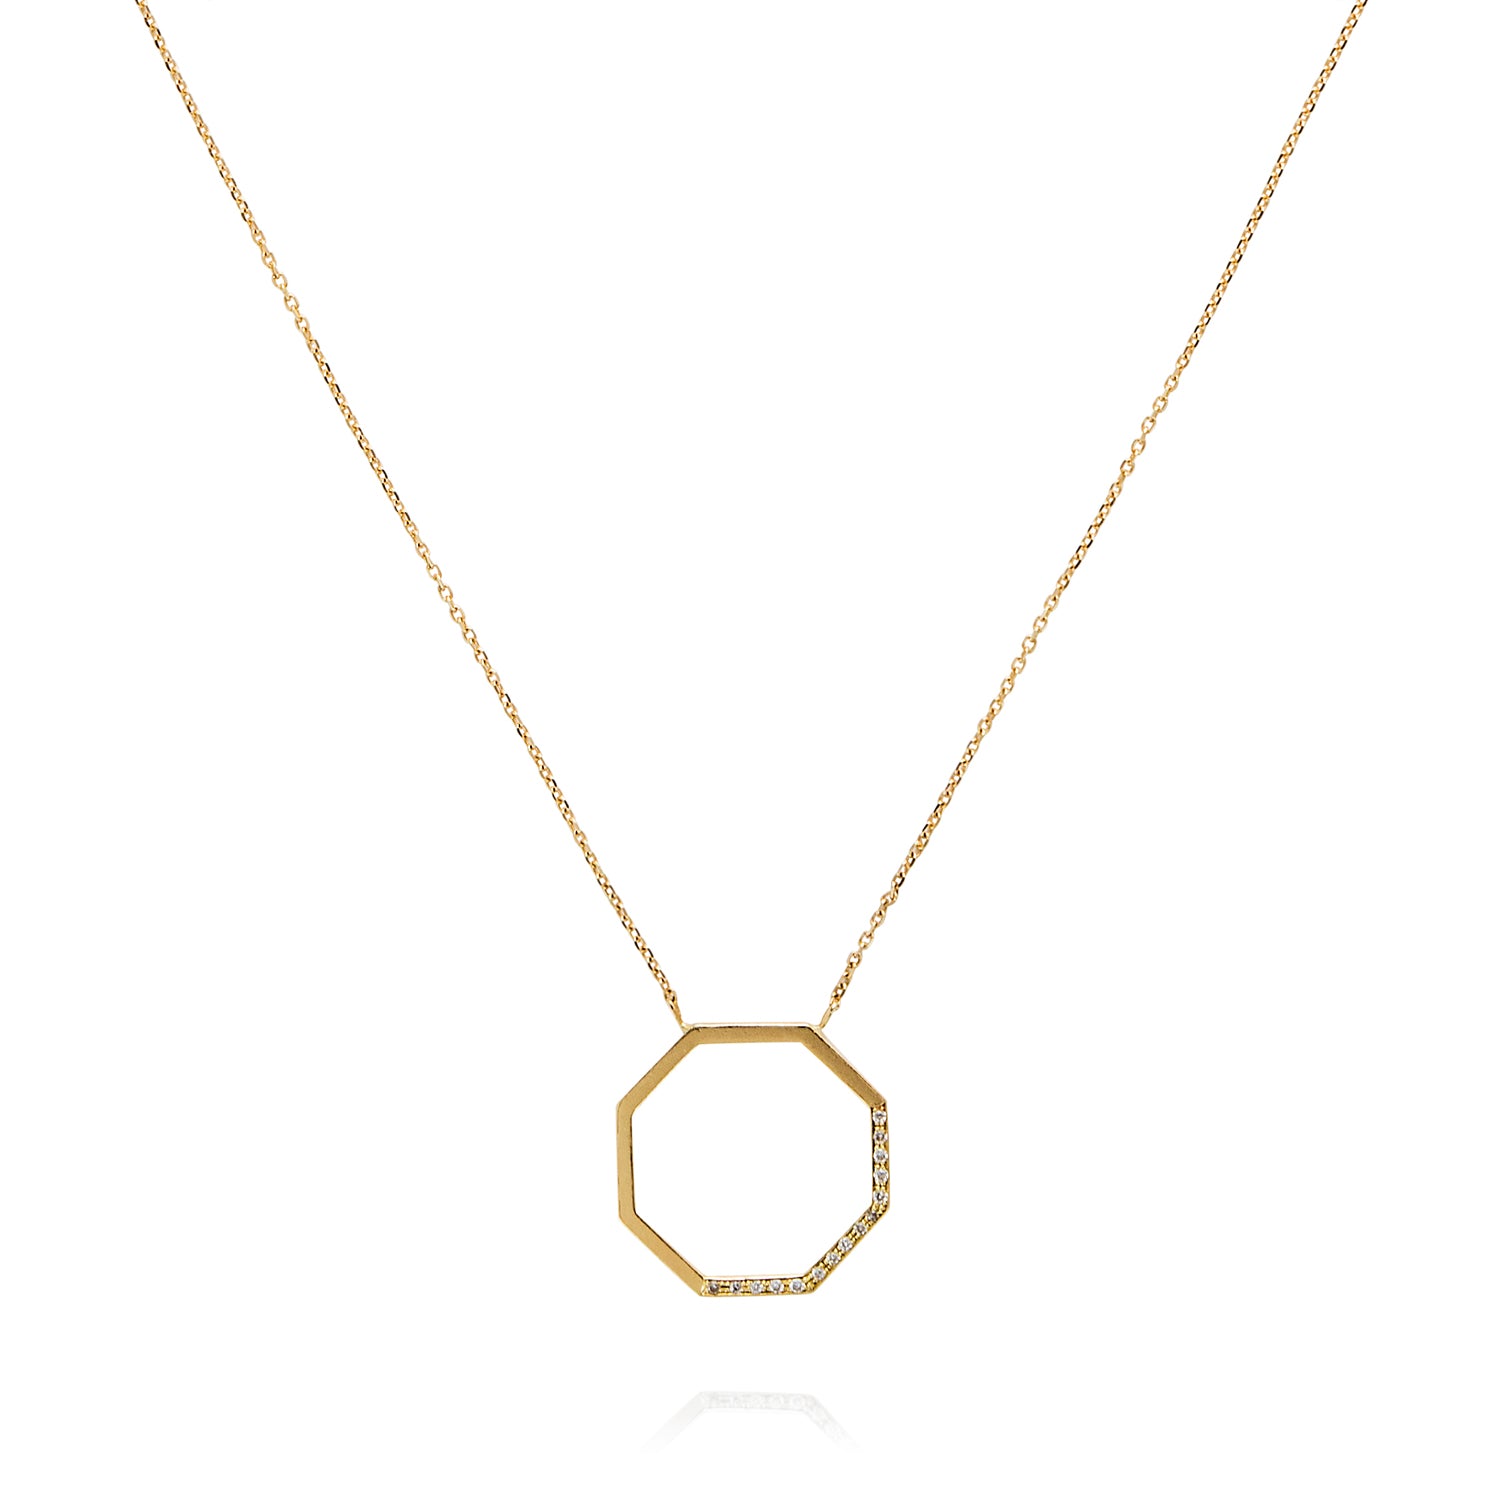 18ct yellow gold octagon necklace pave set with 15 diamonds